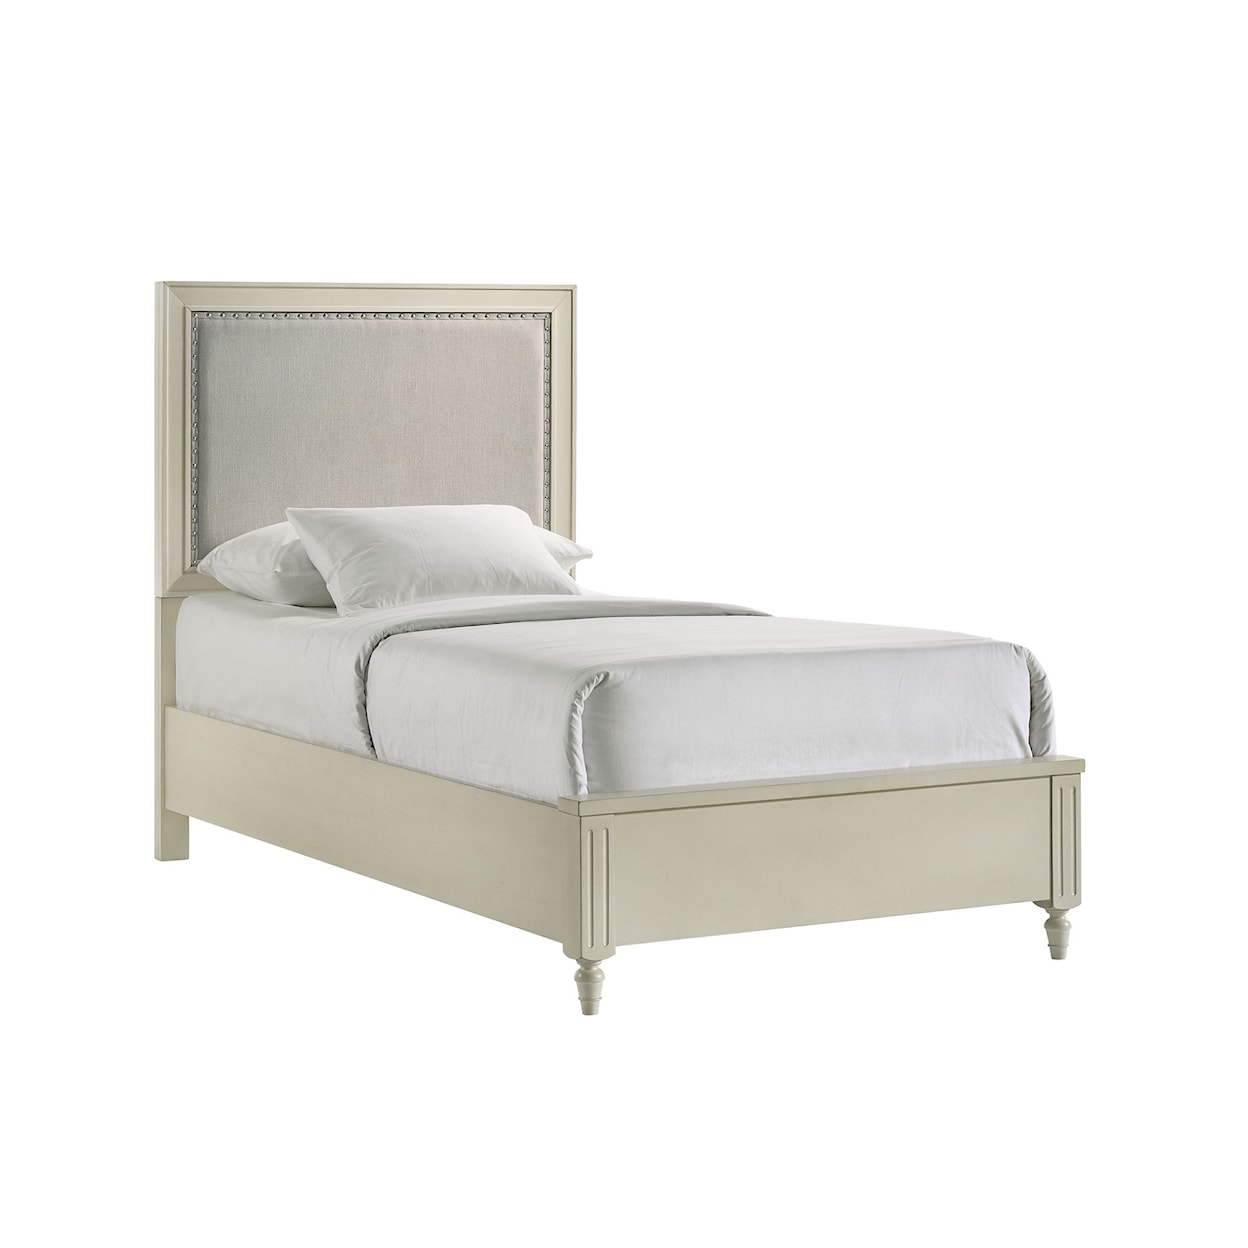 Elements Gianna Upholstered Beds